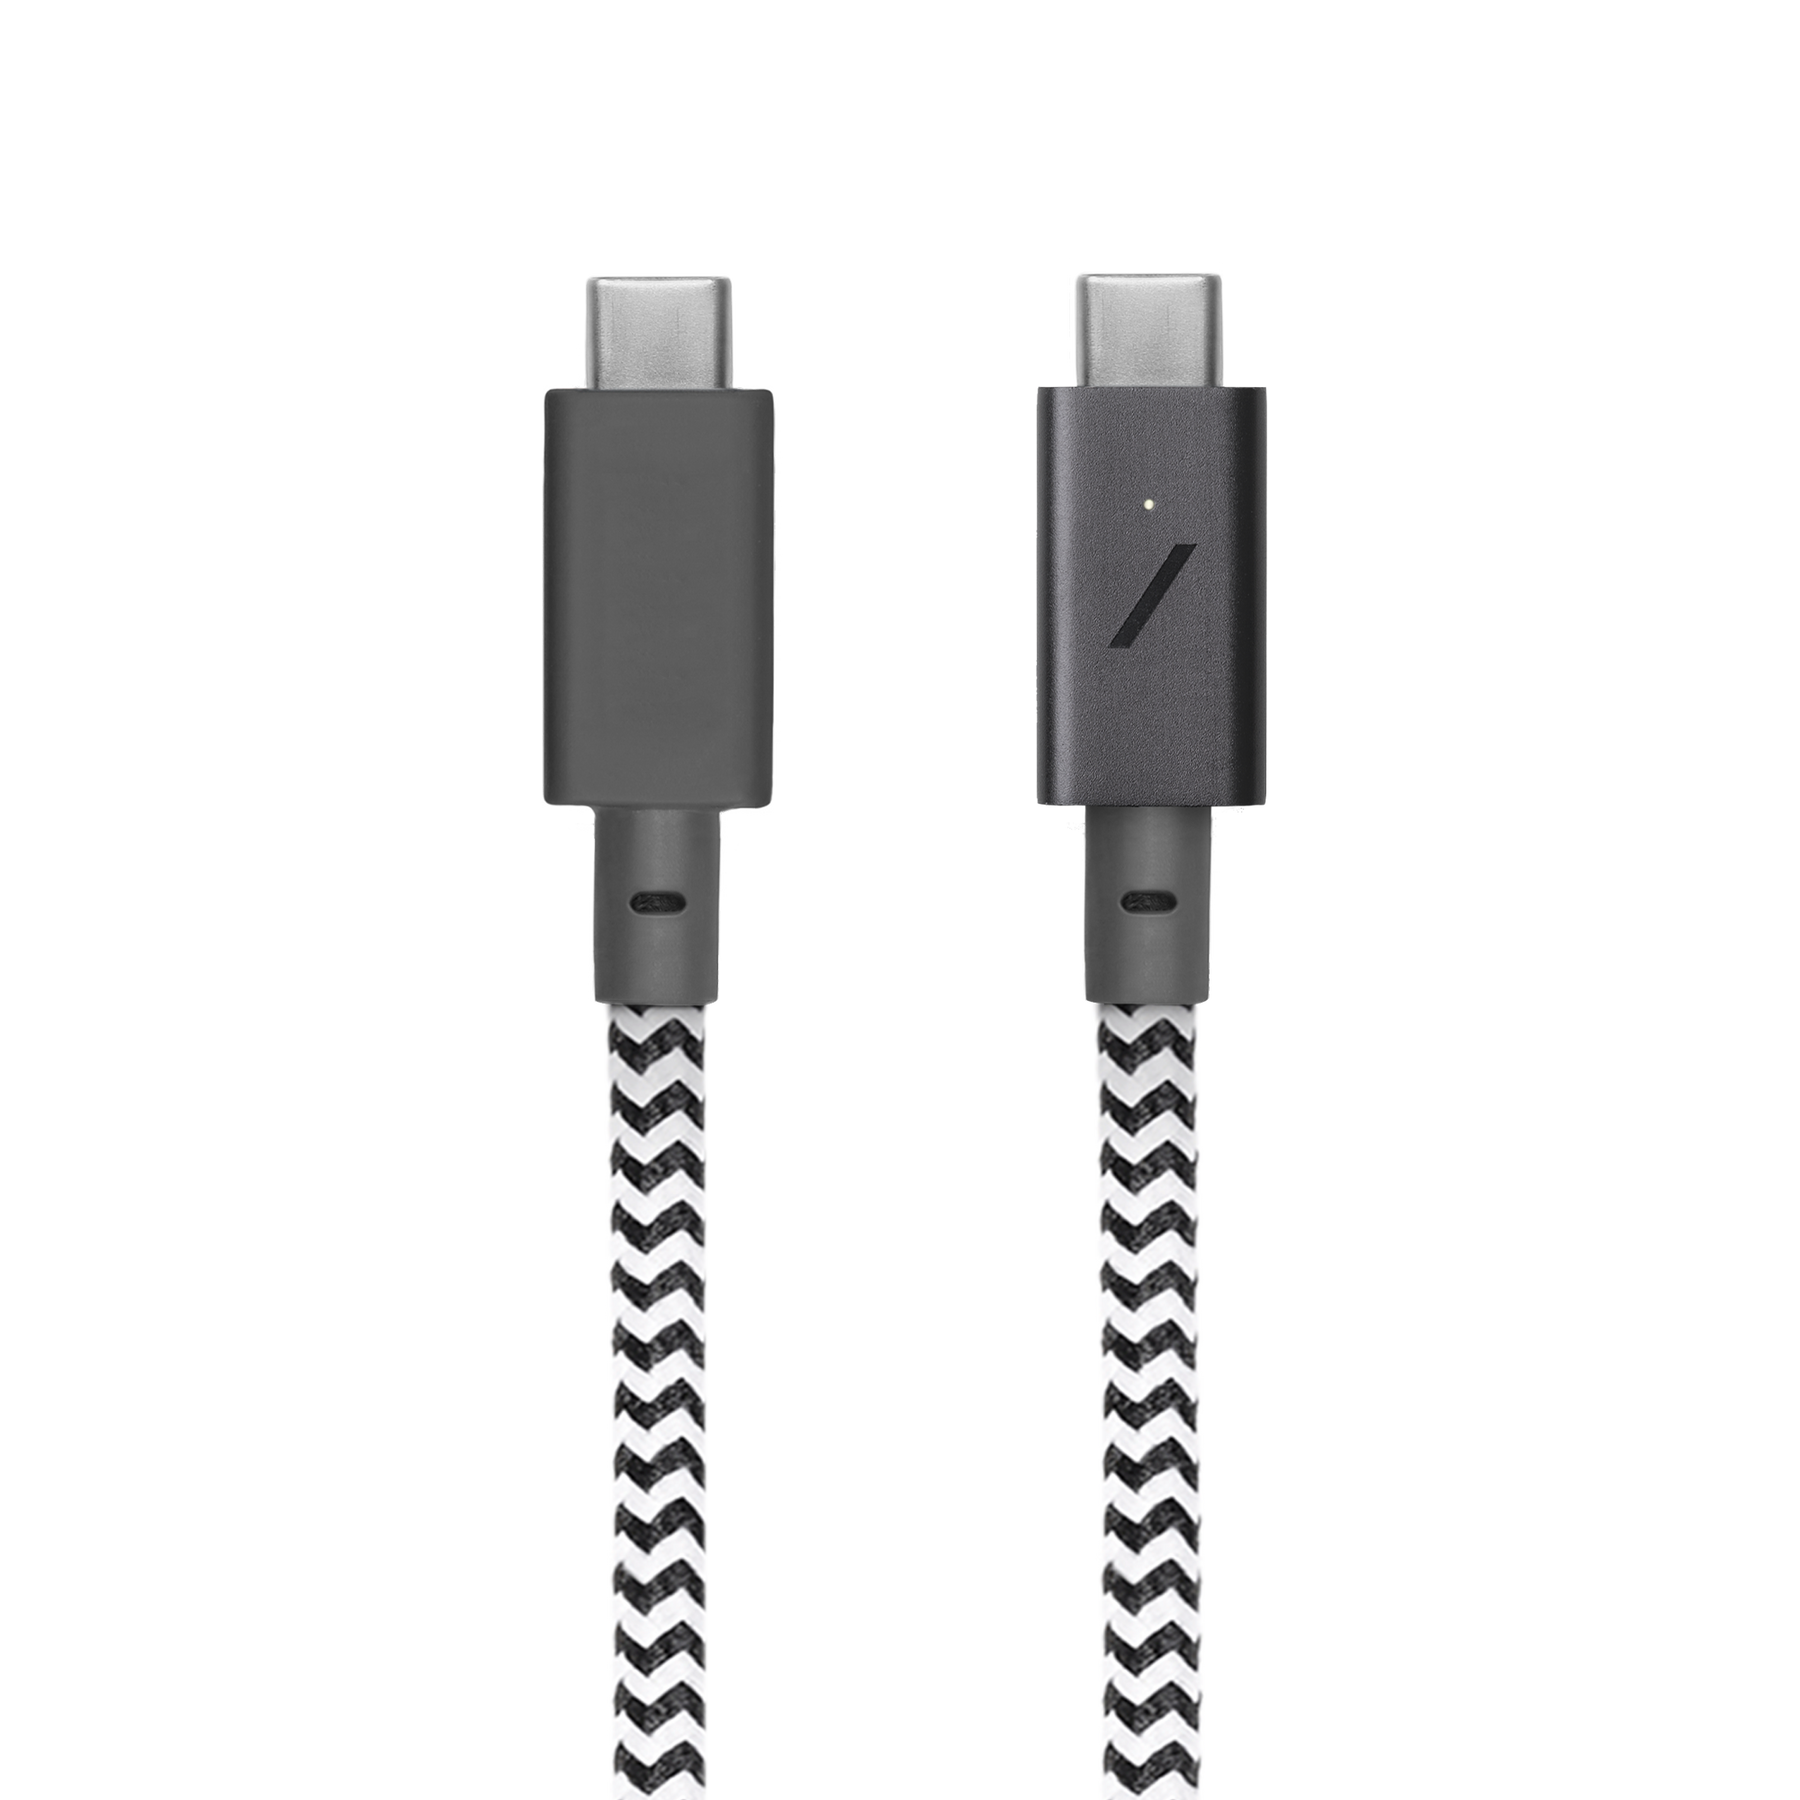 Câble adaptateur USB type-c vers Magsafe 1/2 PD 100W, Charge